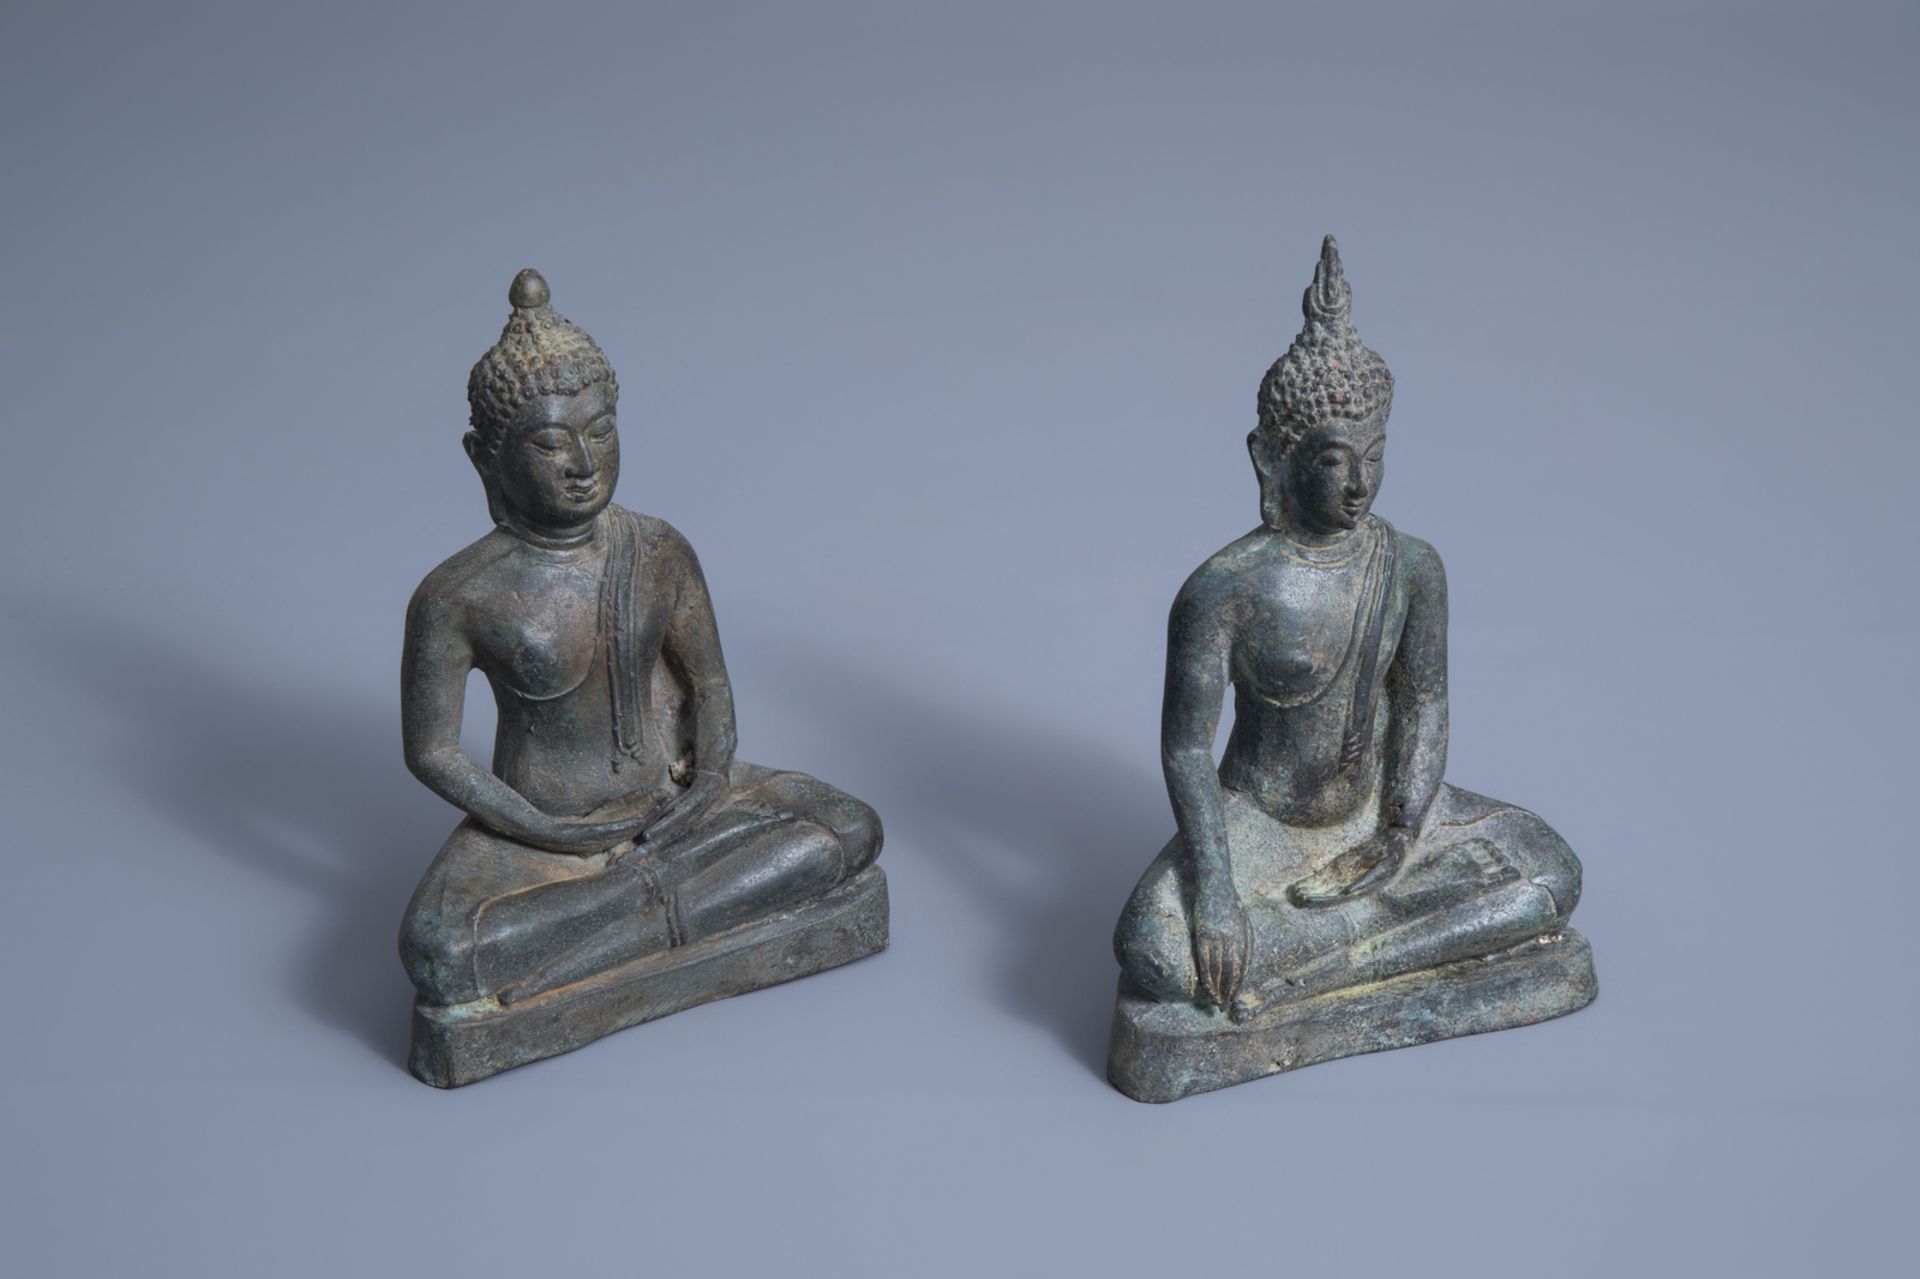 Two patinated bronze figures of Buddha, Laos or Cambodia, ca. 1900 - Image 7 of 7